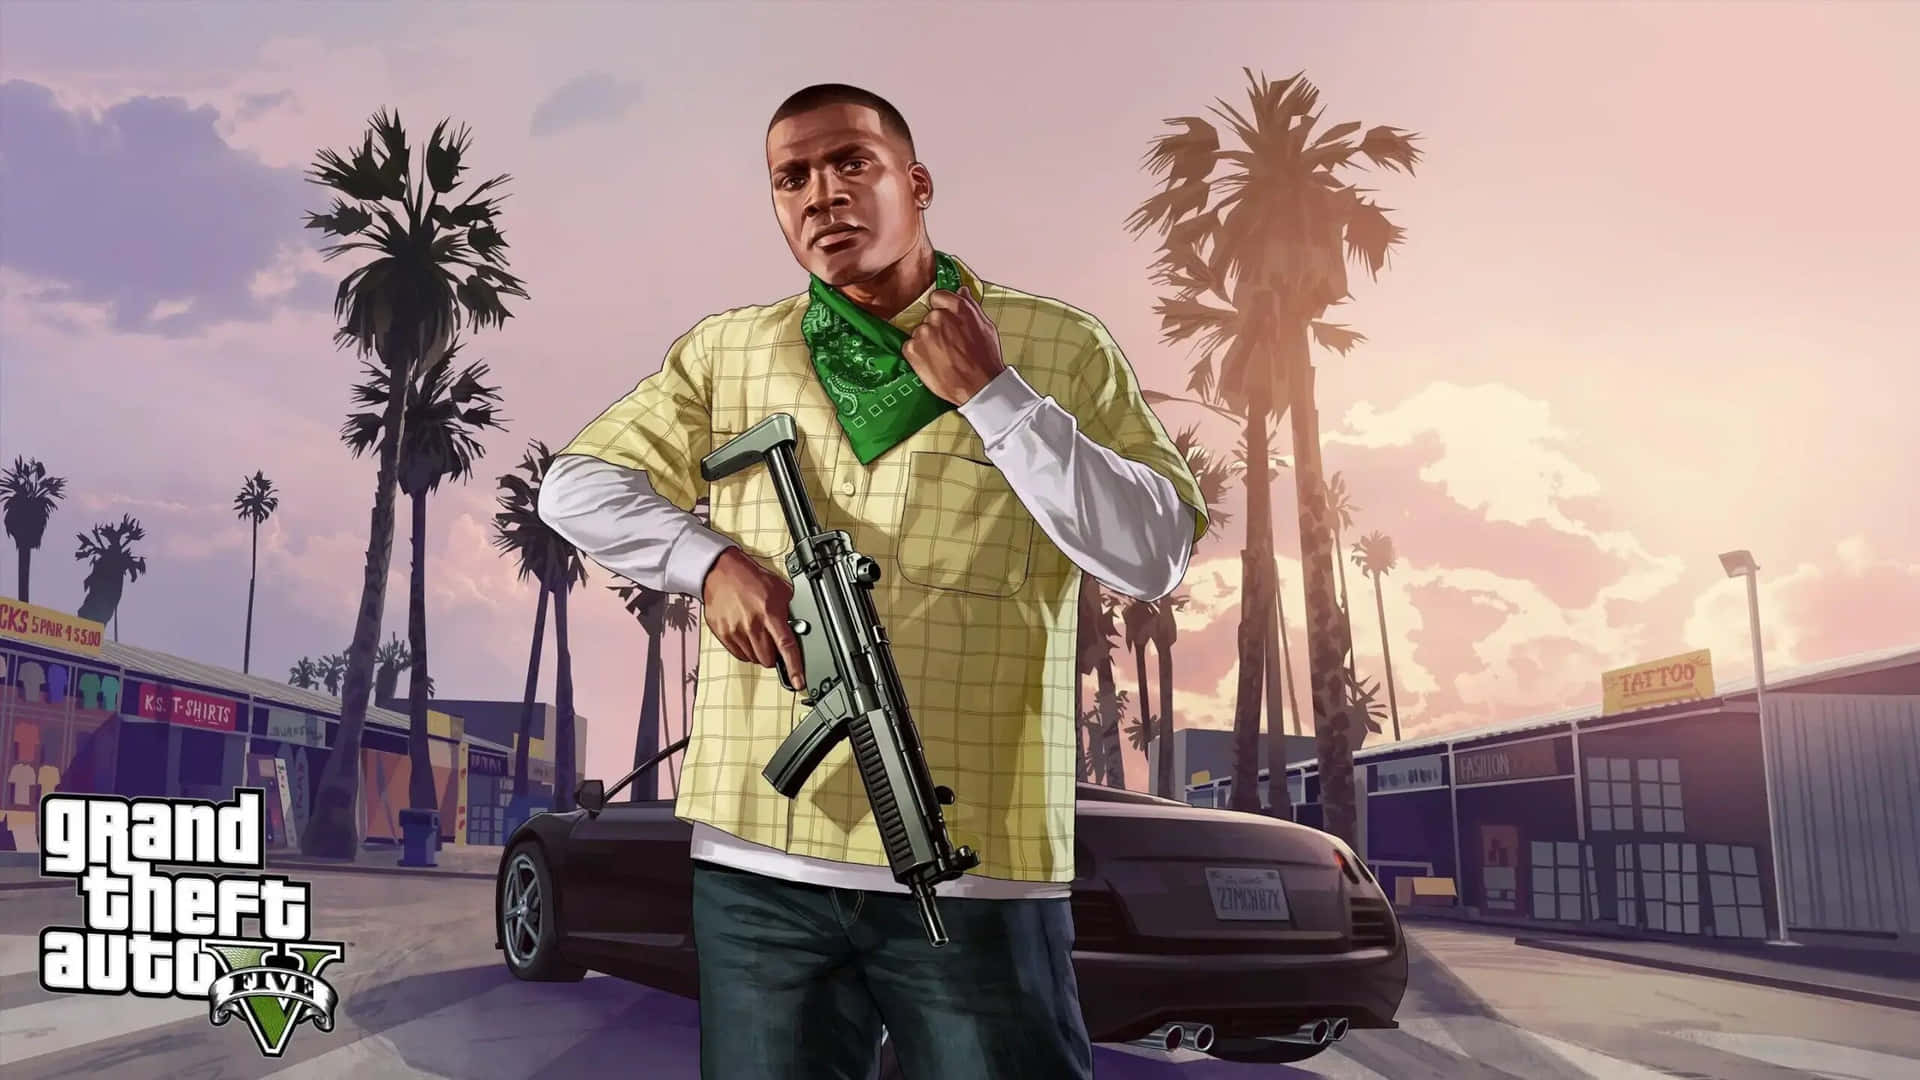 Grand Theft Auto 5 is An Action-Packed Adventure Wallpaper